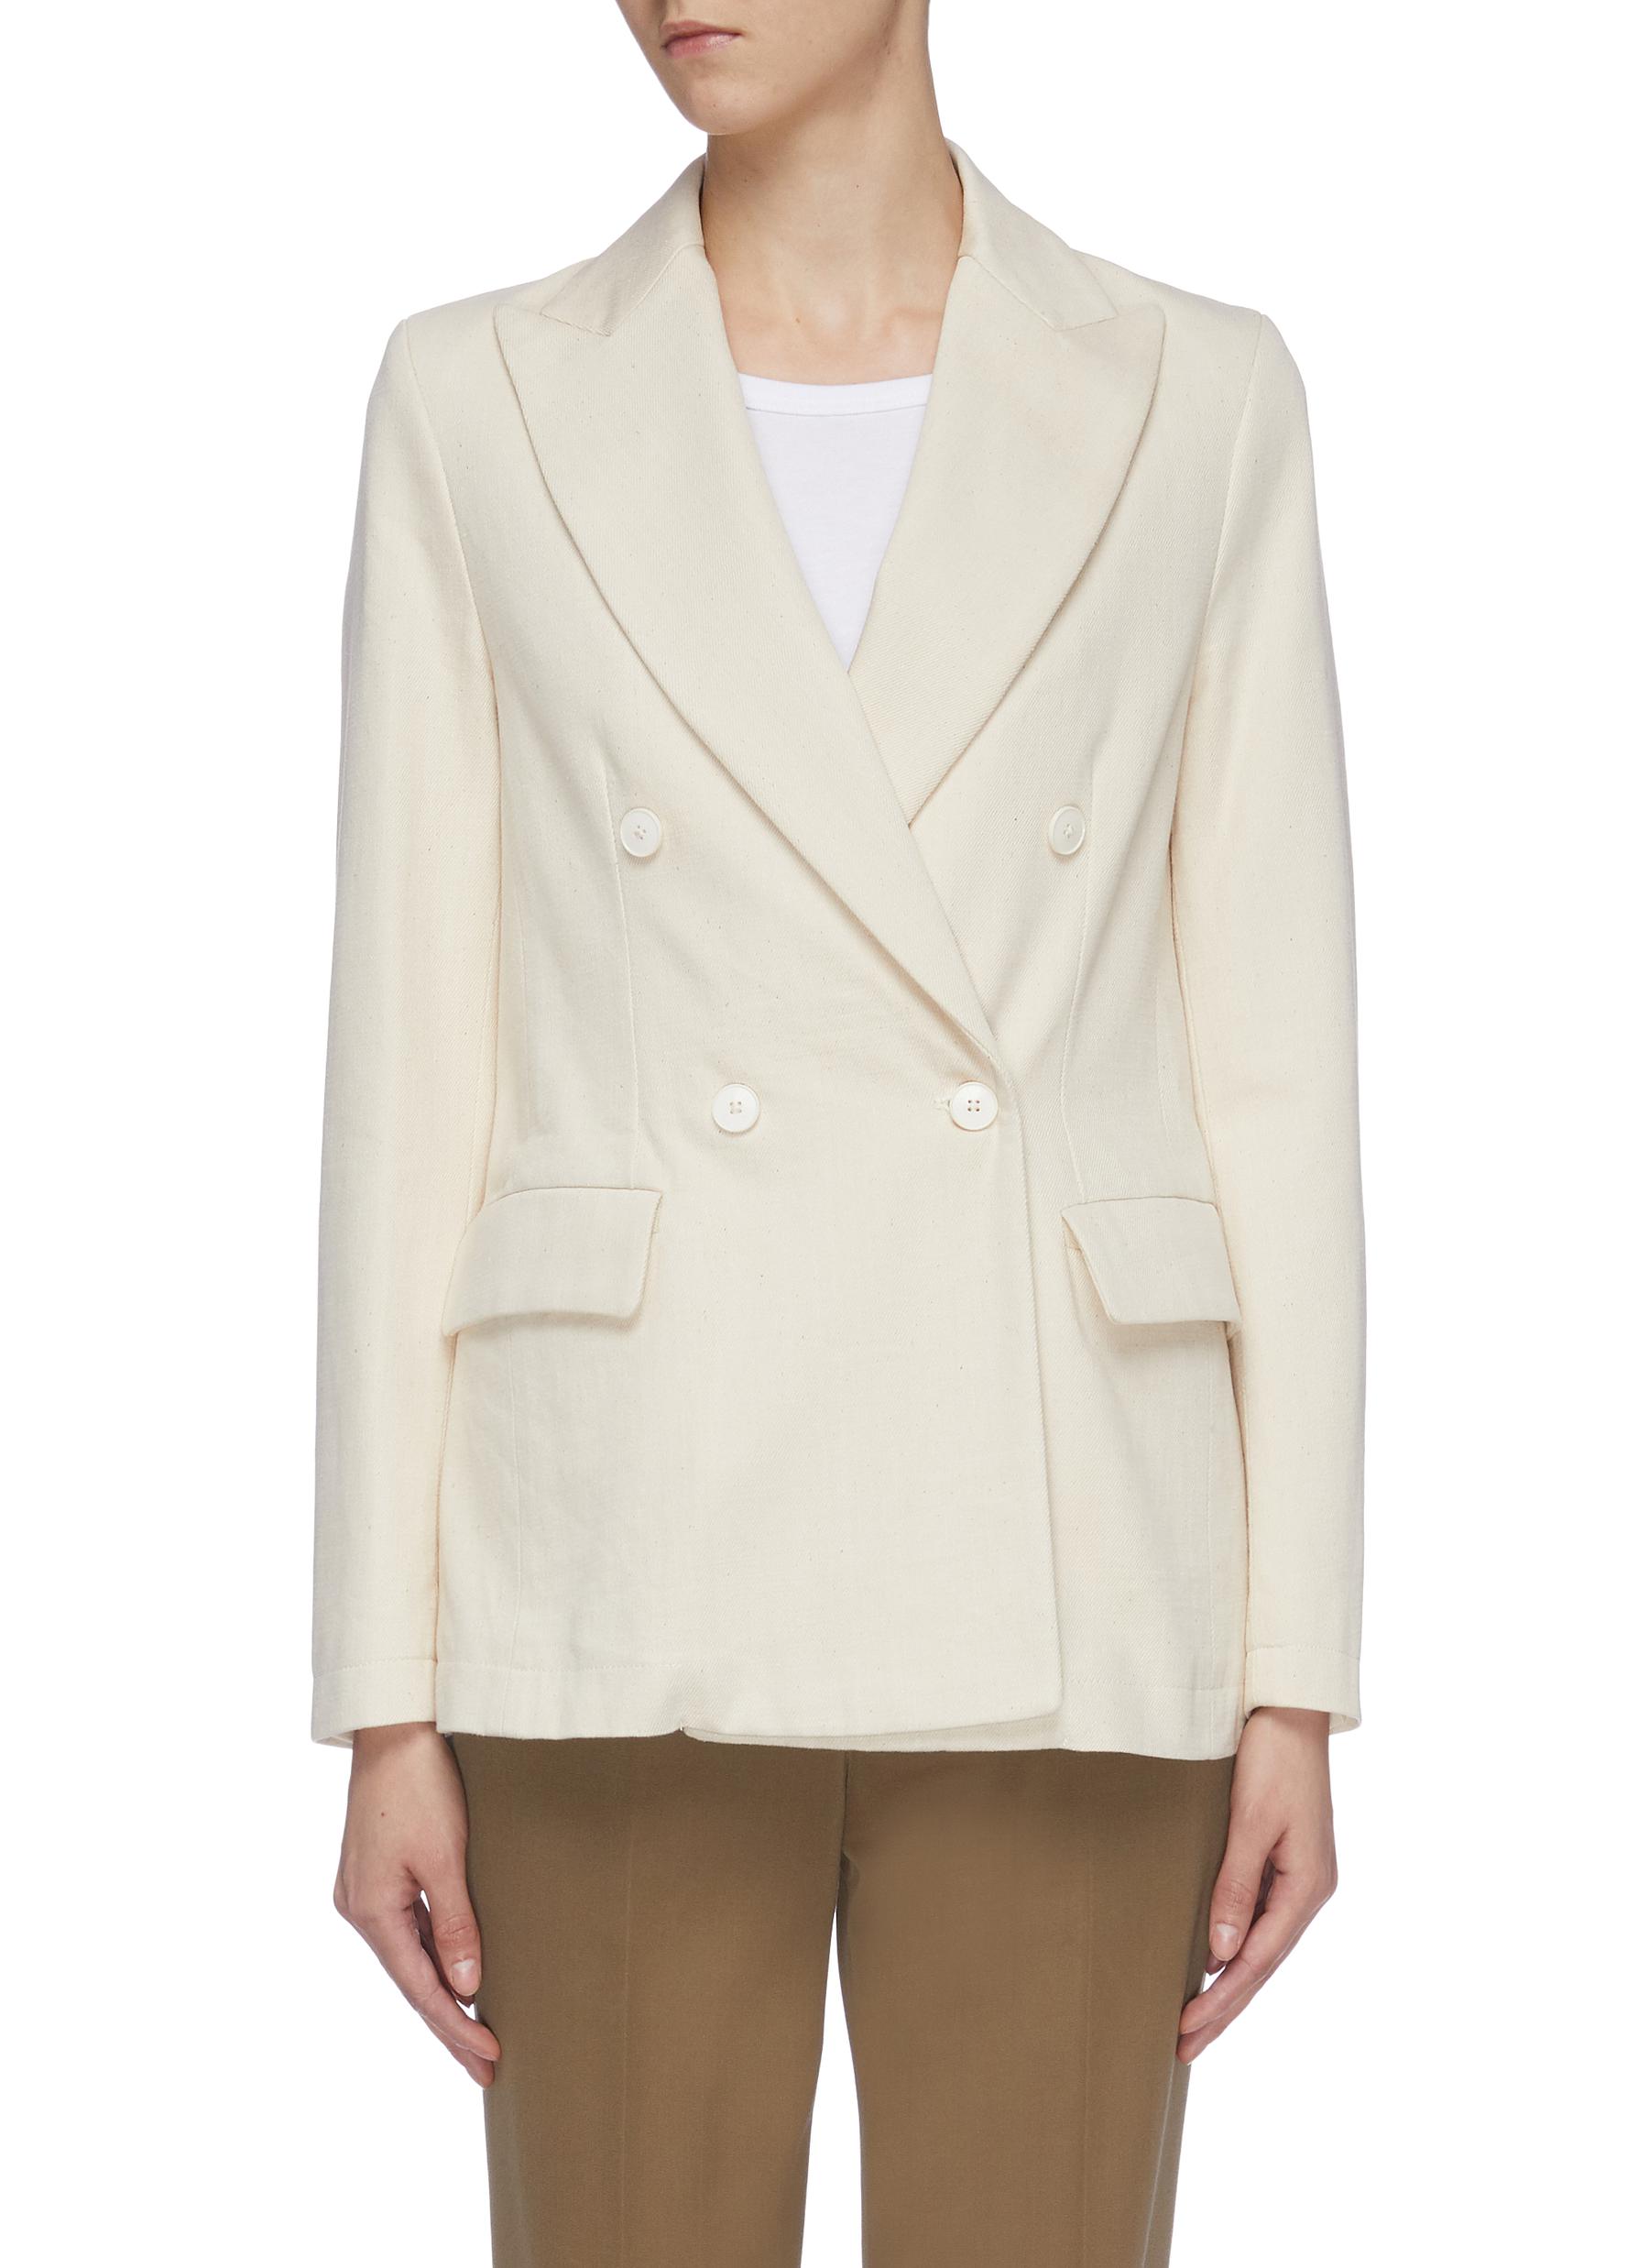 Cleope peaked lapel double breasted blazer by Barena